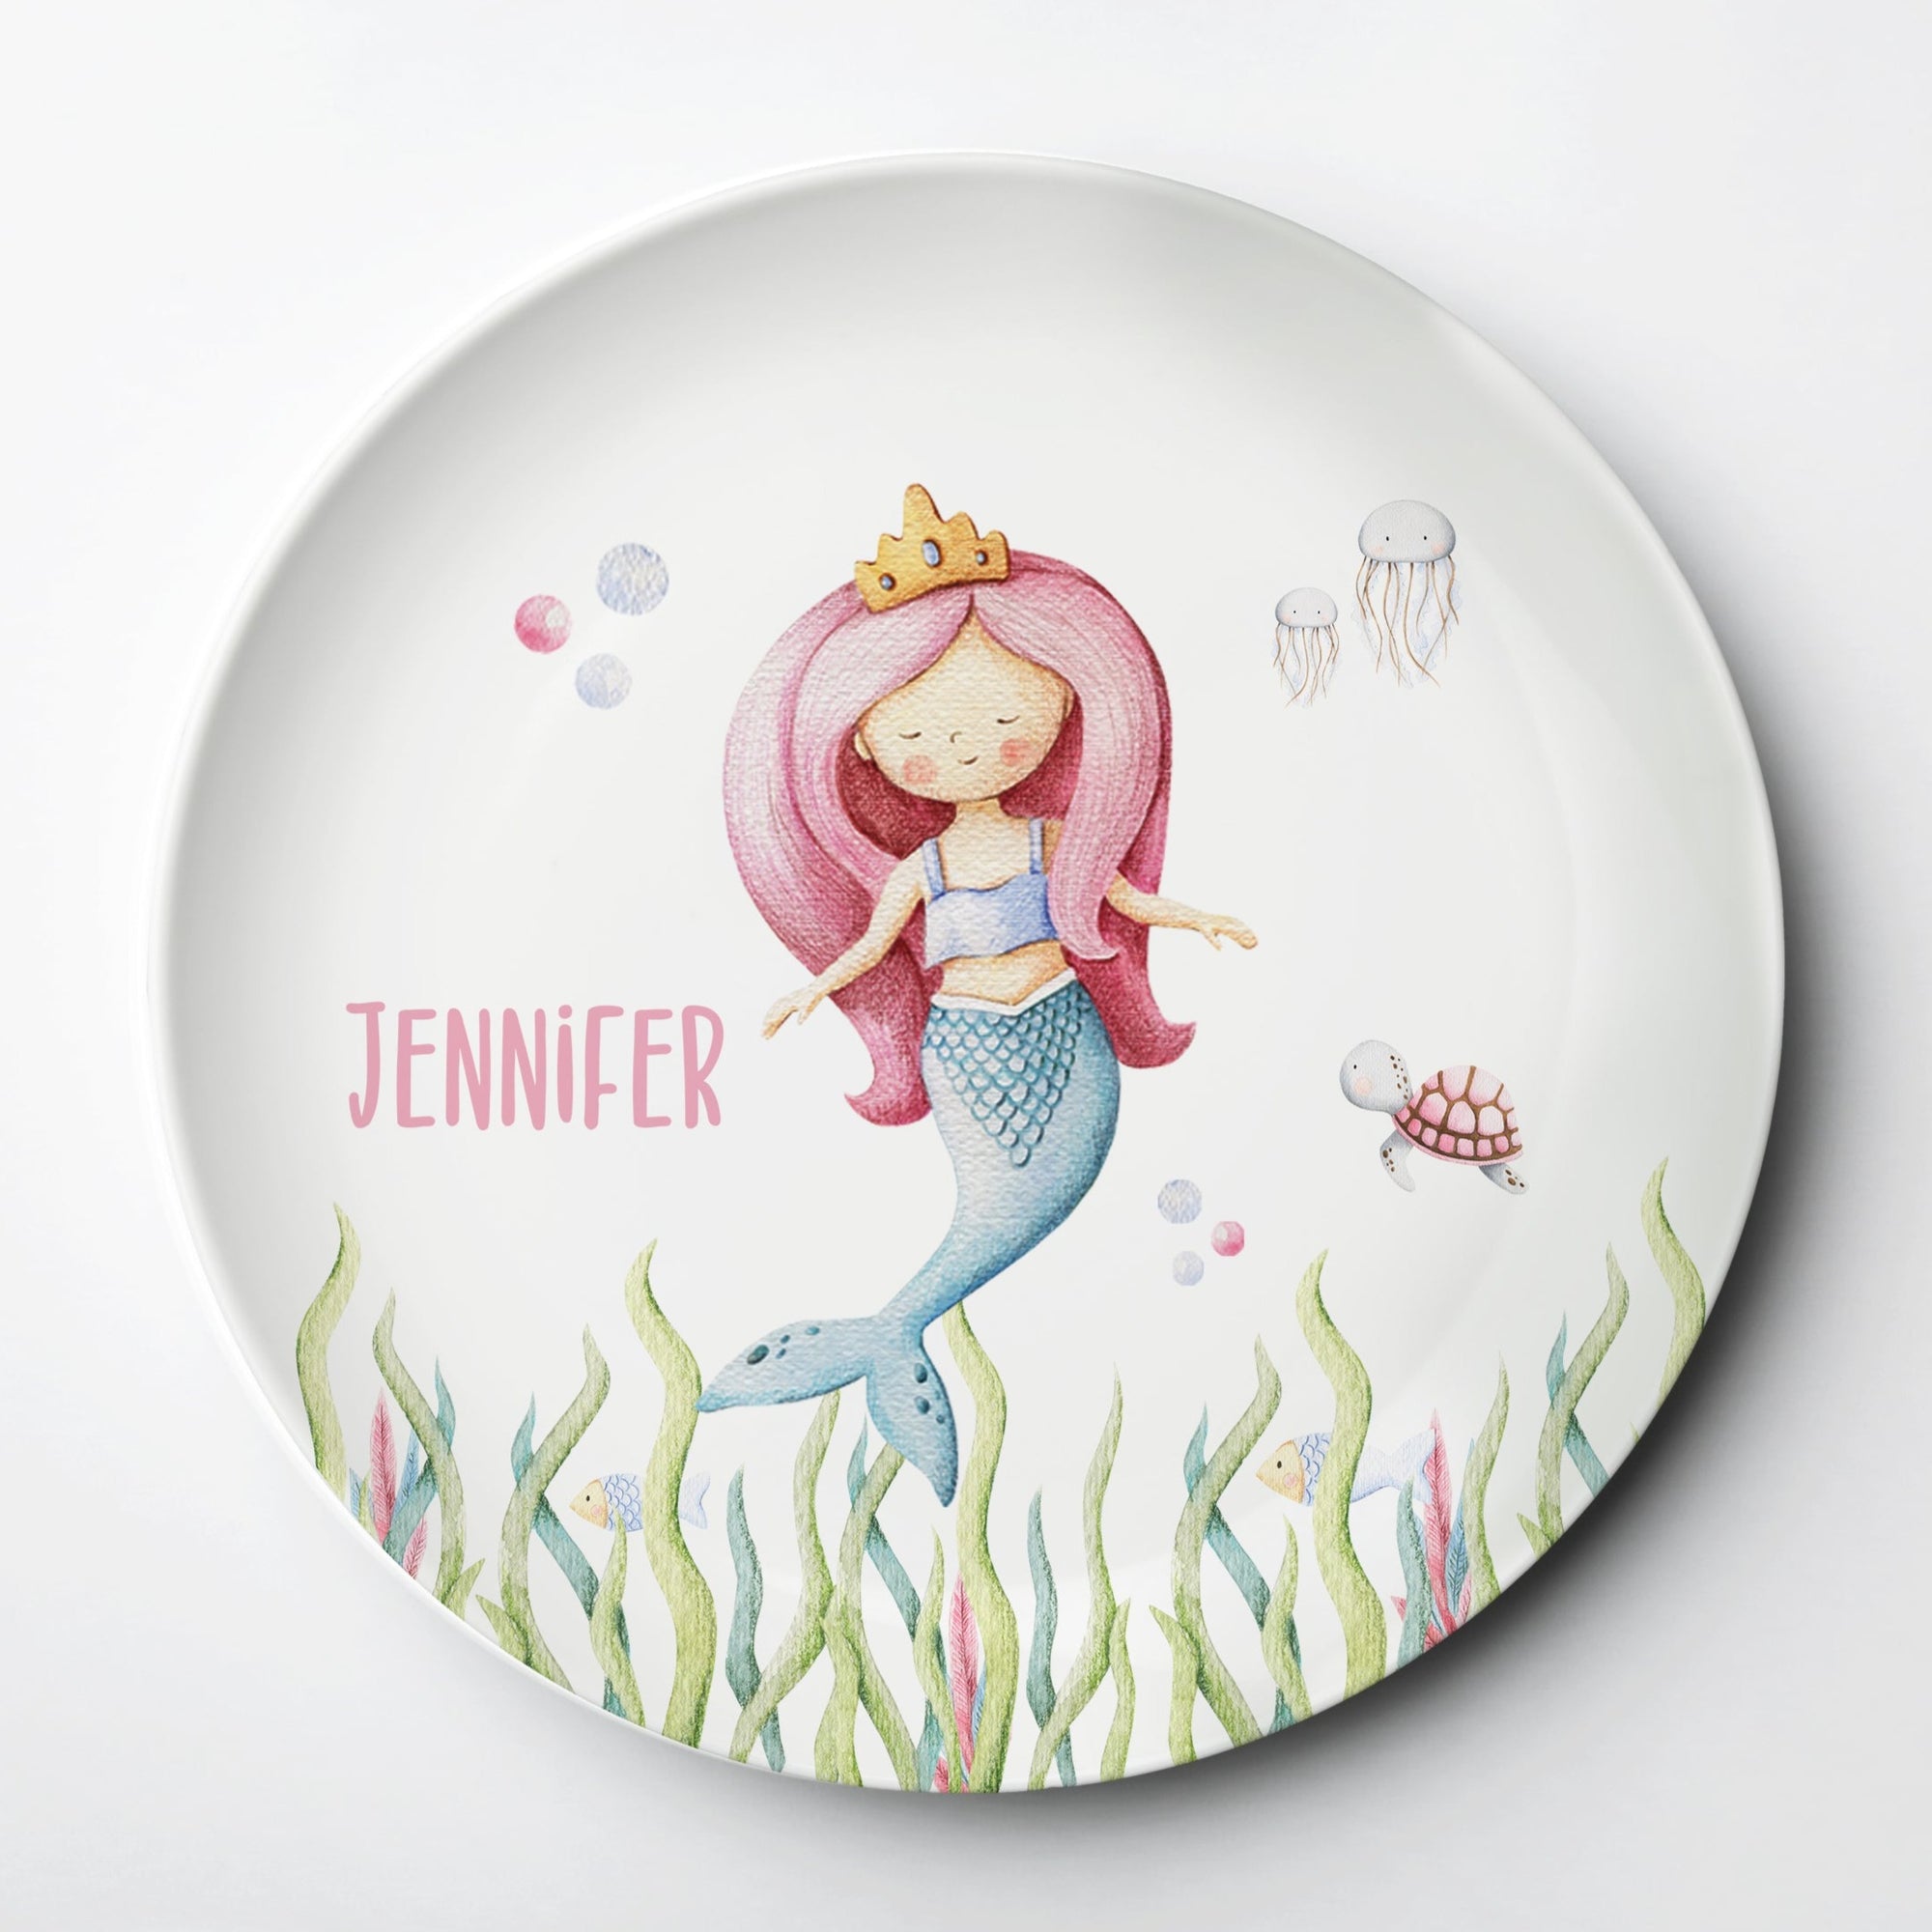 Fun mermaid with pink hair floating in the center of the plate above a kelp forest.  Turtle, jellyfish and a few fish swimming complete the scene for all your mermaid loving kids!  ThermoSāf® reusable plate that is dishwasher, oven and microwave safe! Pipsy.com